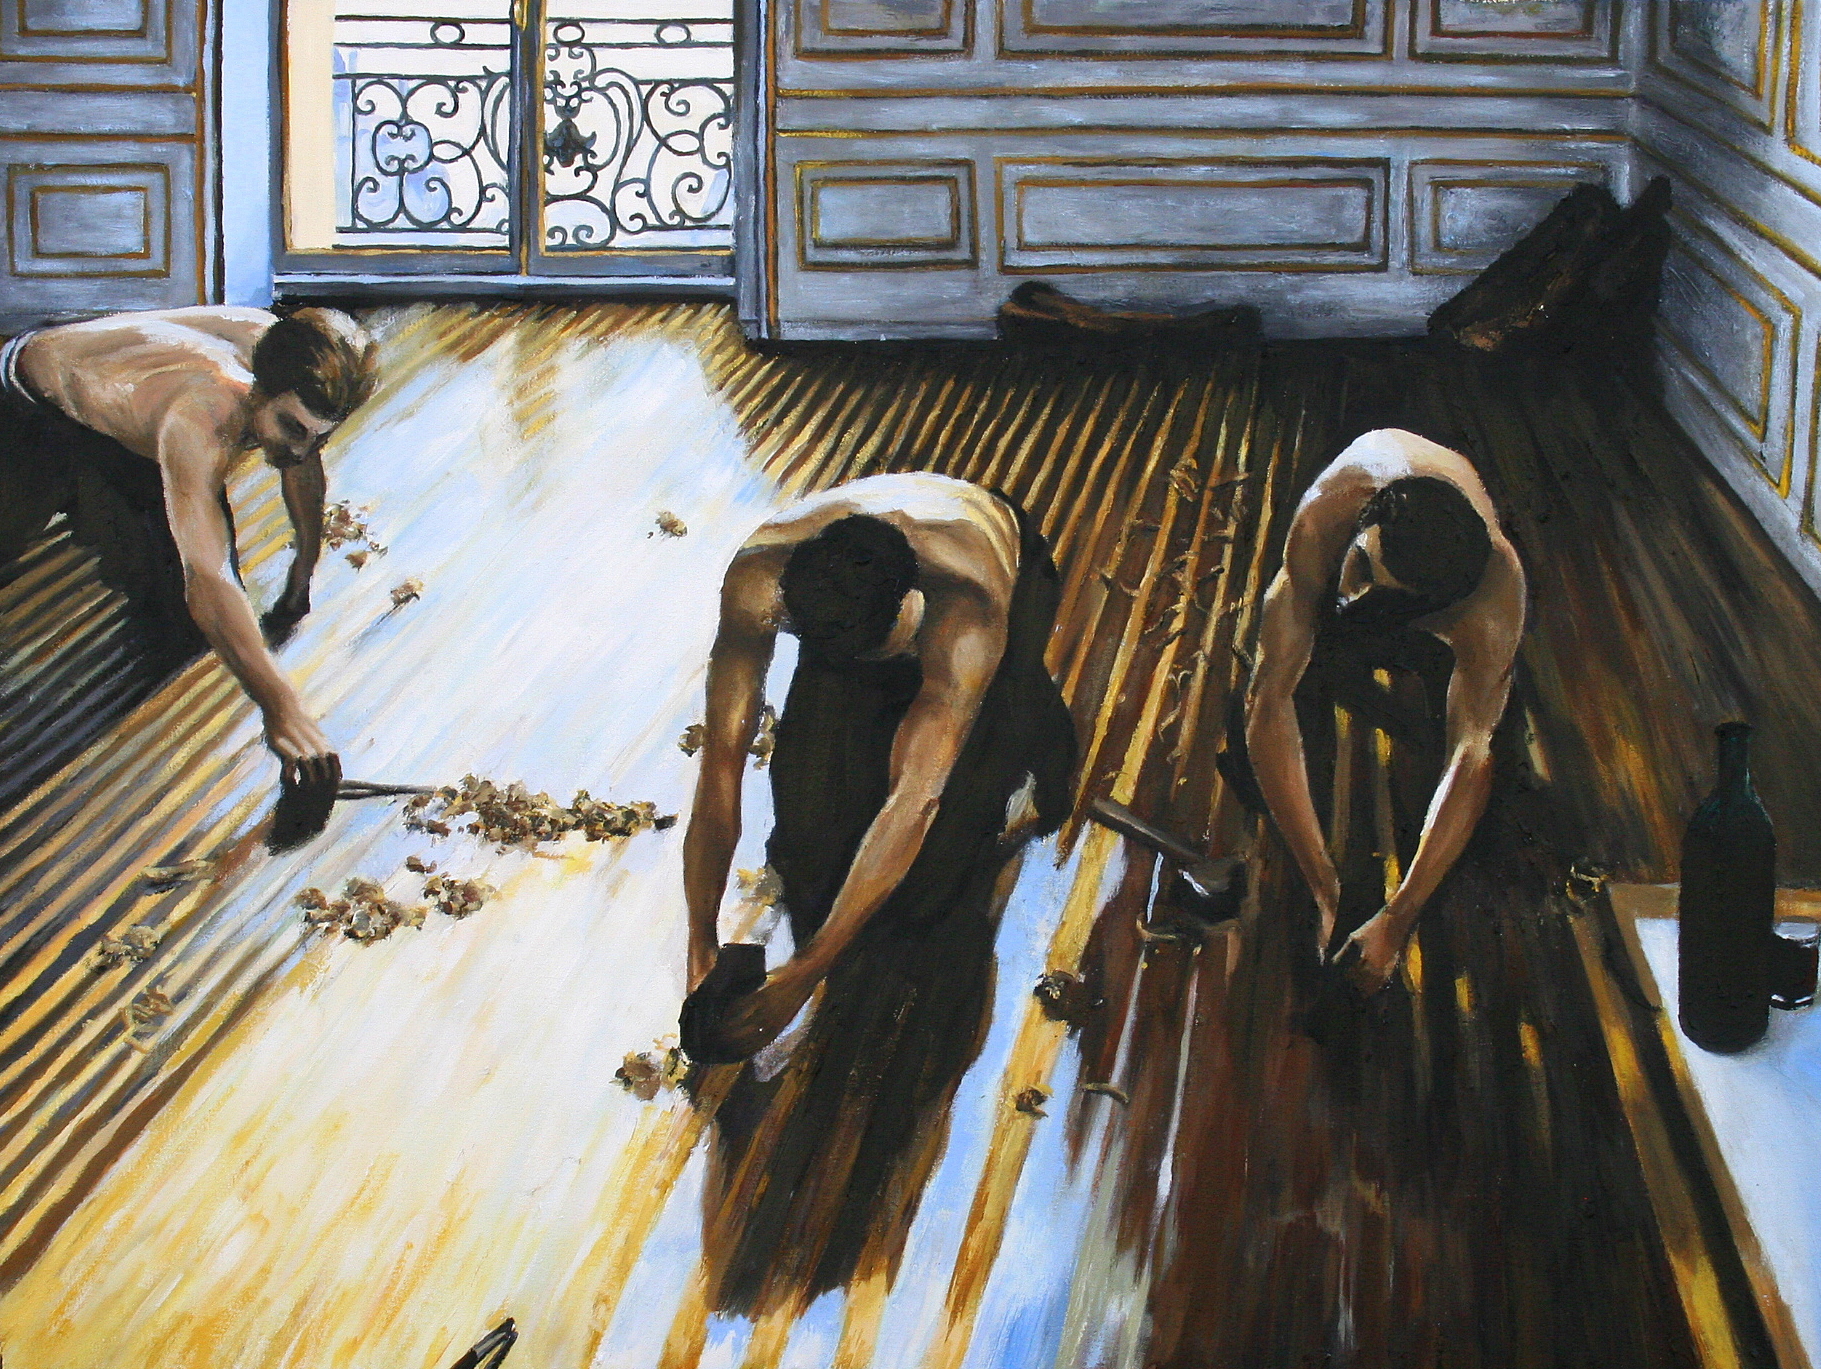 Gustave Caillebotte's Floor Scrapers by Jessica Siemens 2010 oil on canvas